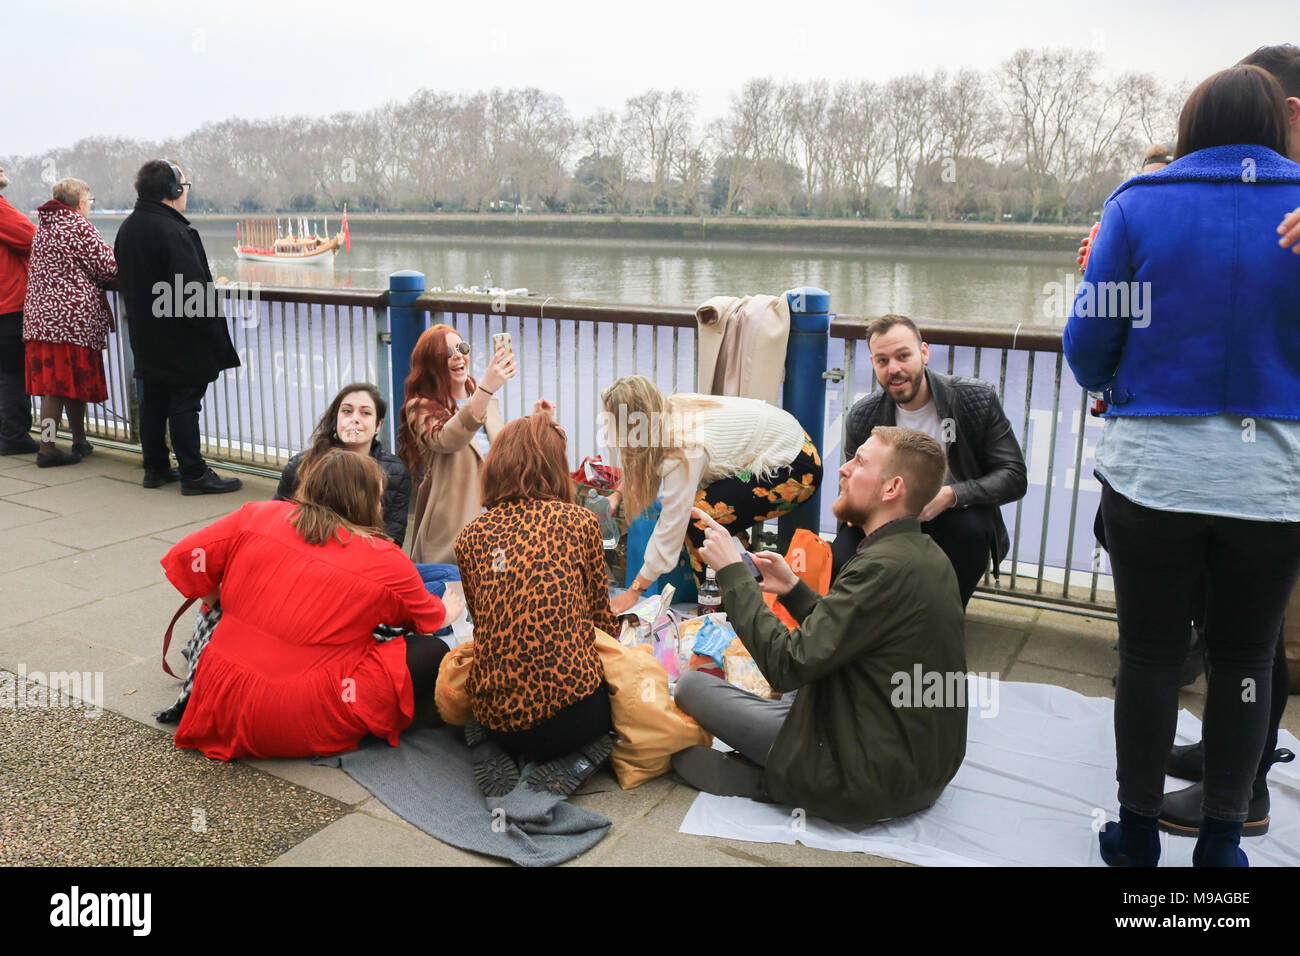 London UK. 24th March 2018.  Crowds gather on Putney embankment to watch the university boat race Credit: amer ghazzal/Alamy Live News Stock Photo